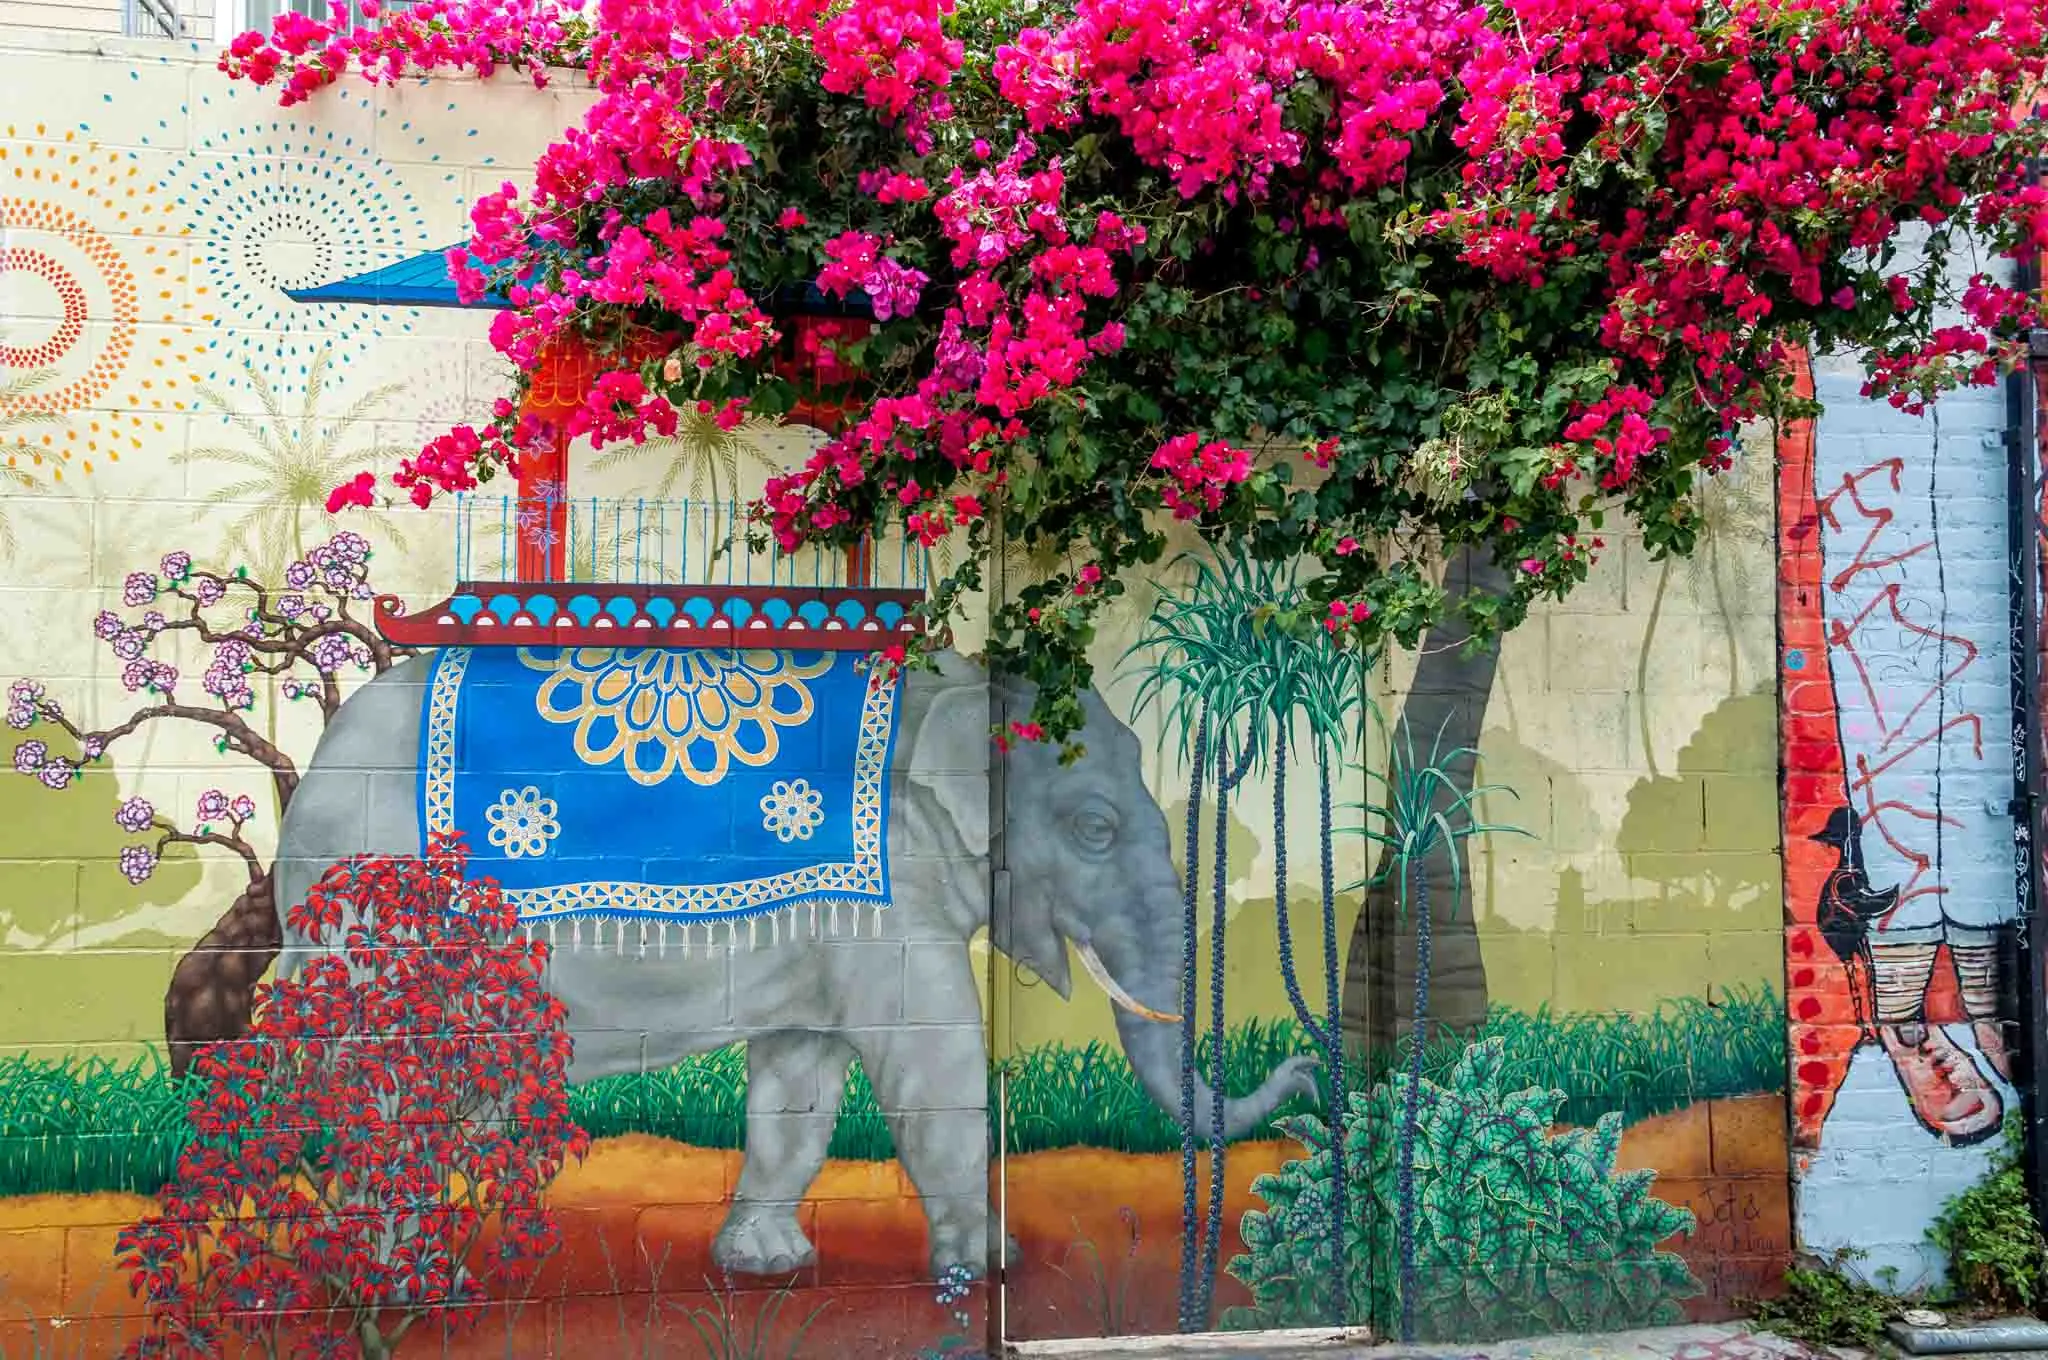 Elephant mural that combines with a tree with pink flowers.